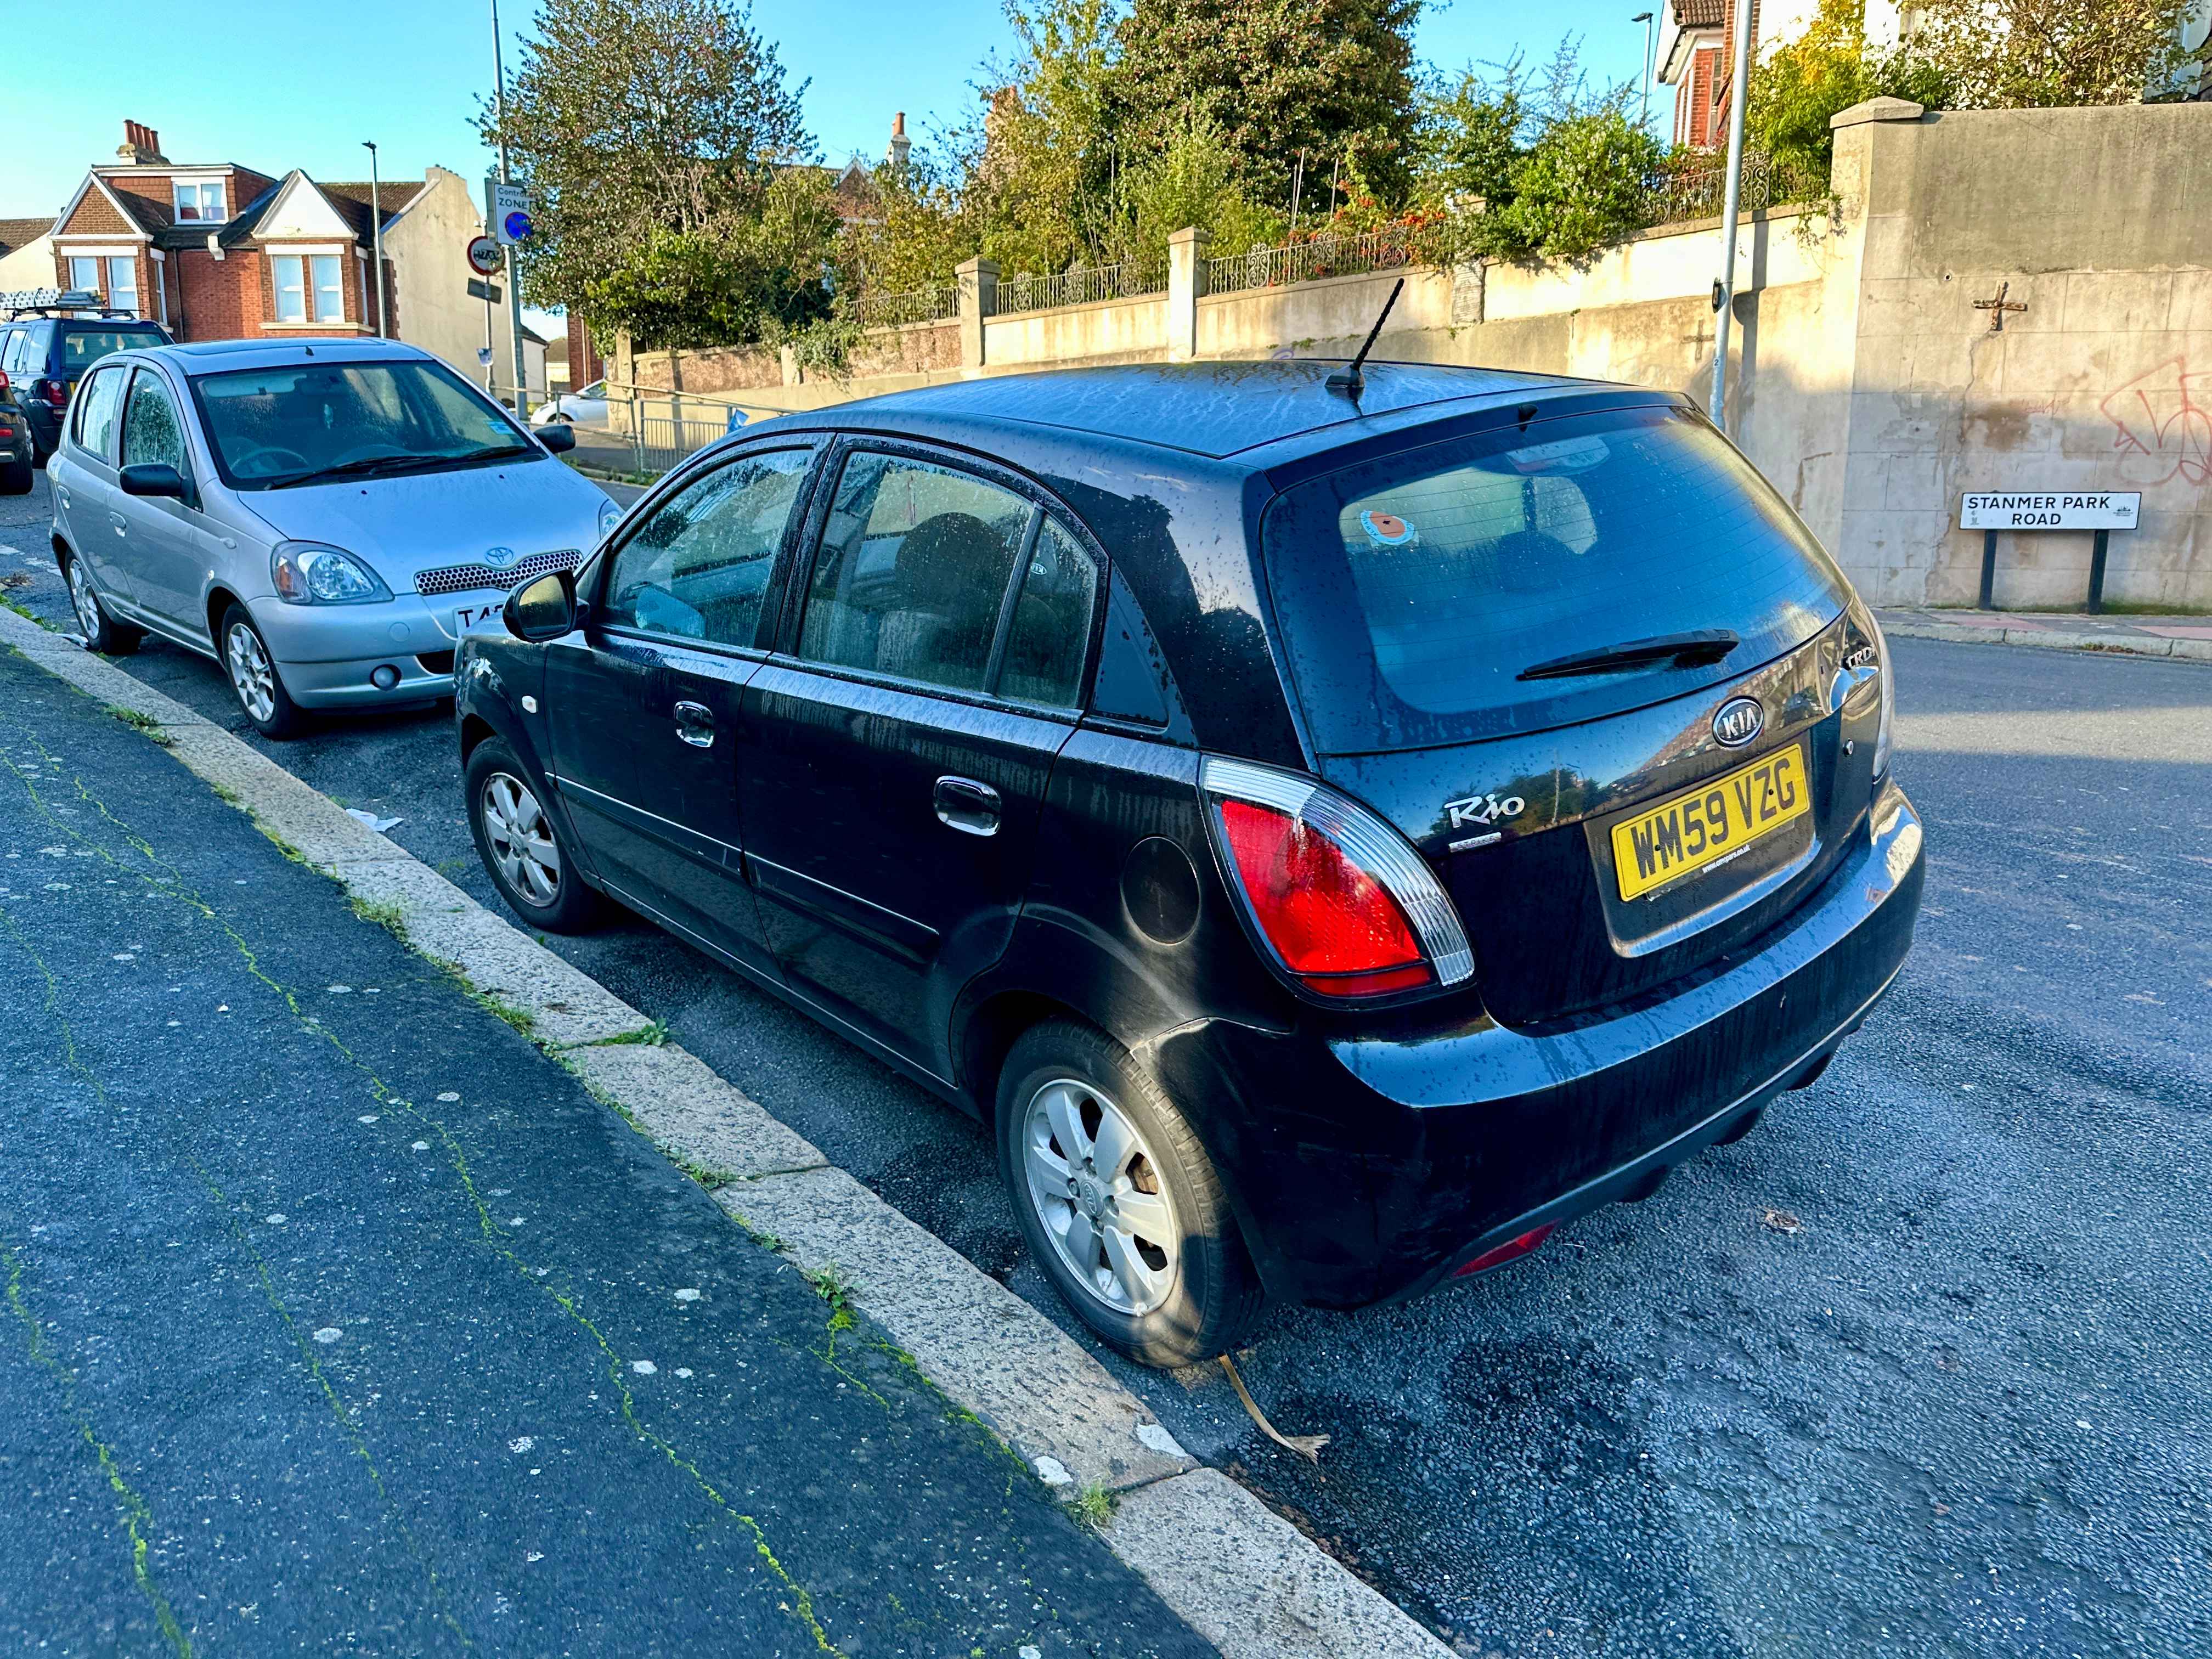 Photograph of WM59 VZG - a Black Kia Rio parked in Hollingdean by a non-resident. The fourth of four photographs supplied by the residents of Hollingdean.